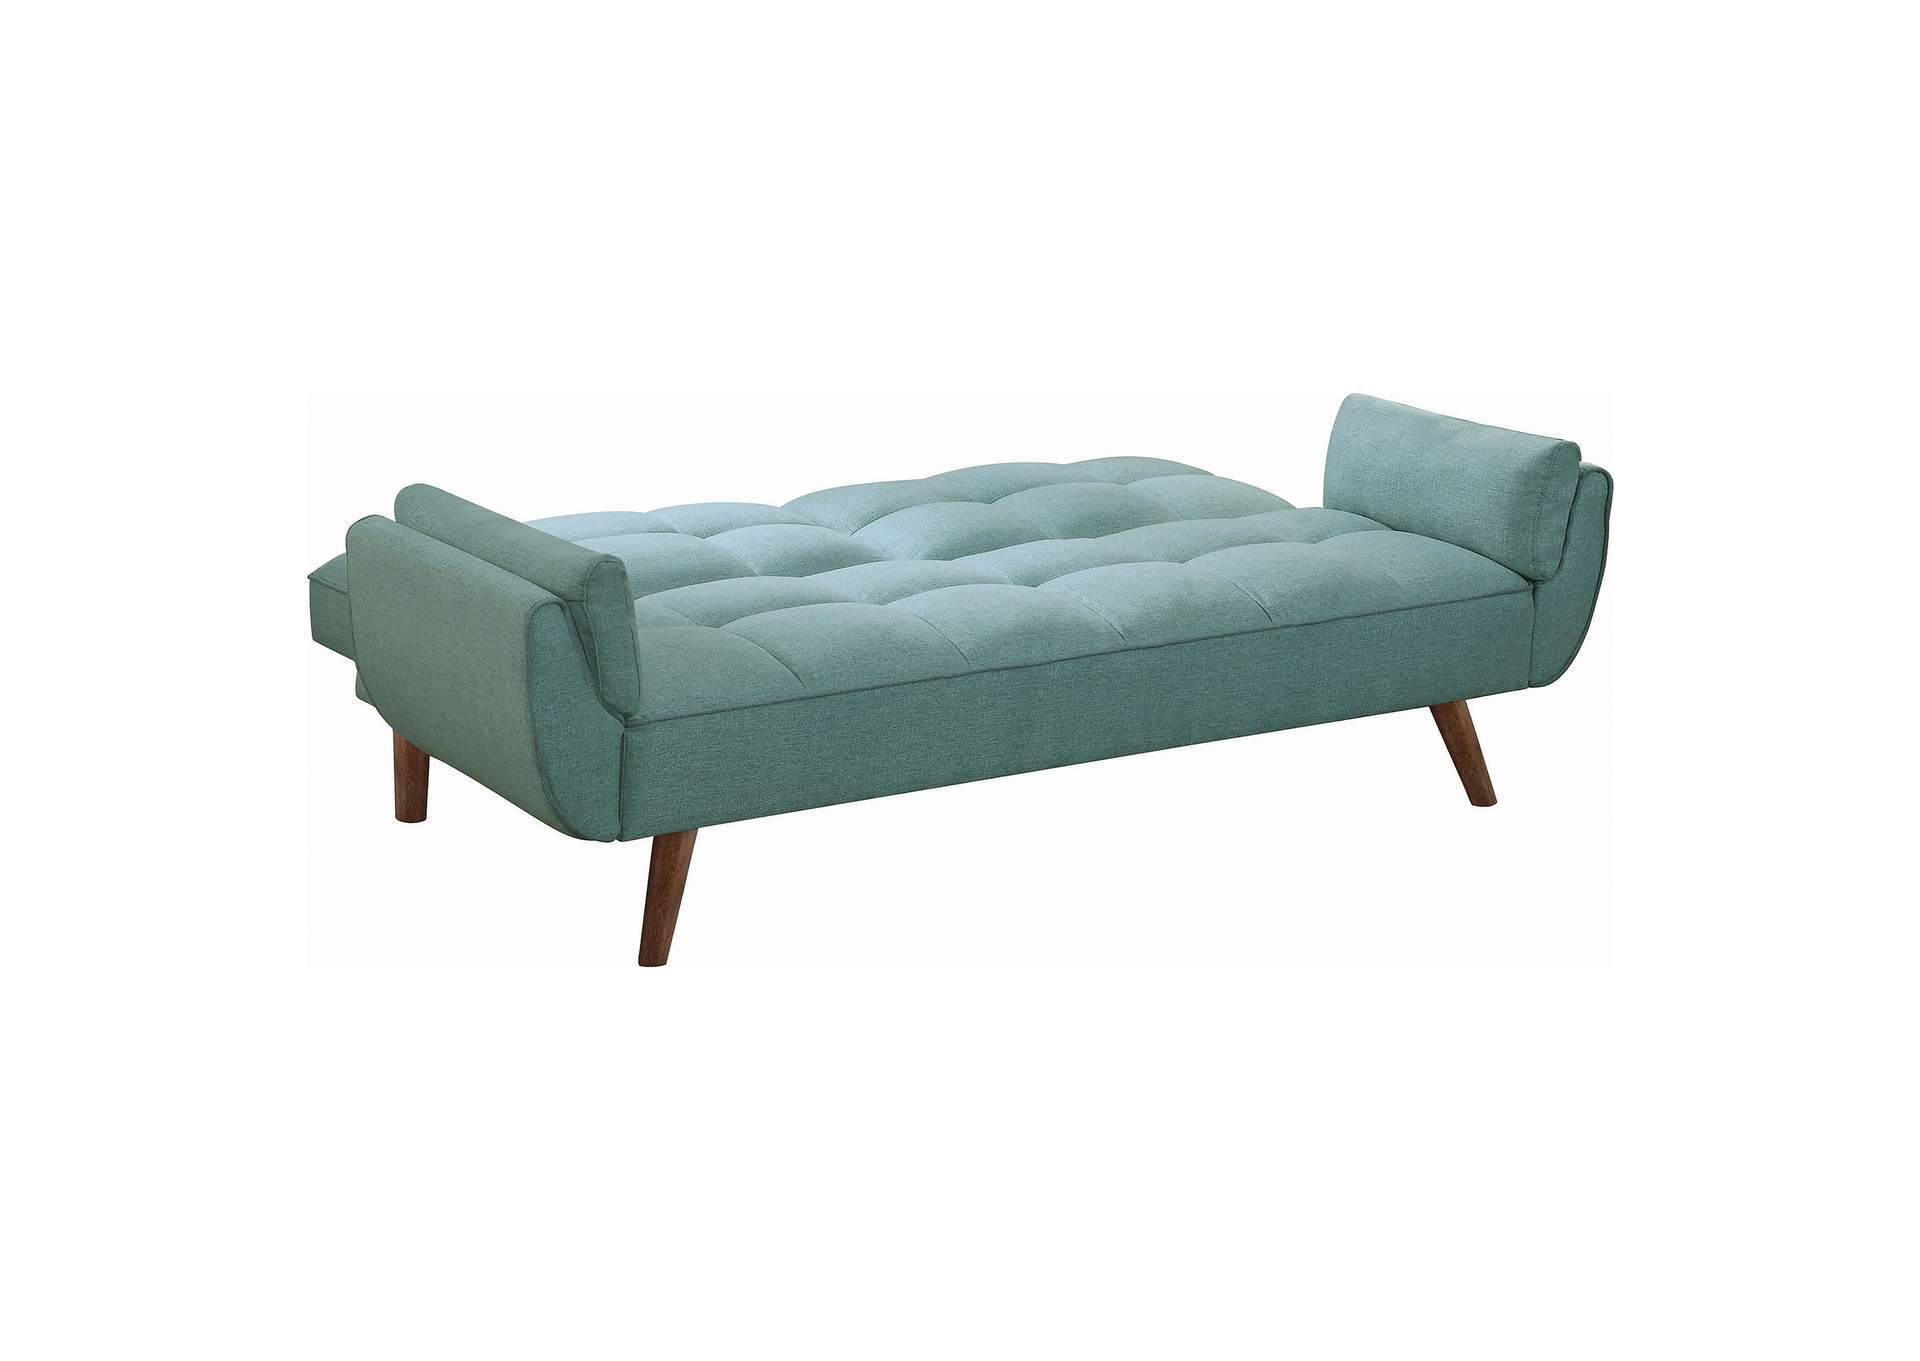 Caufield Biscuit-tufted Sofa Bed Turquoise Blue,Coaster Furniture